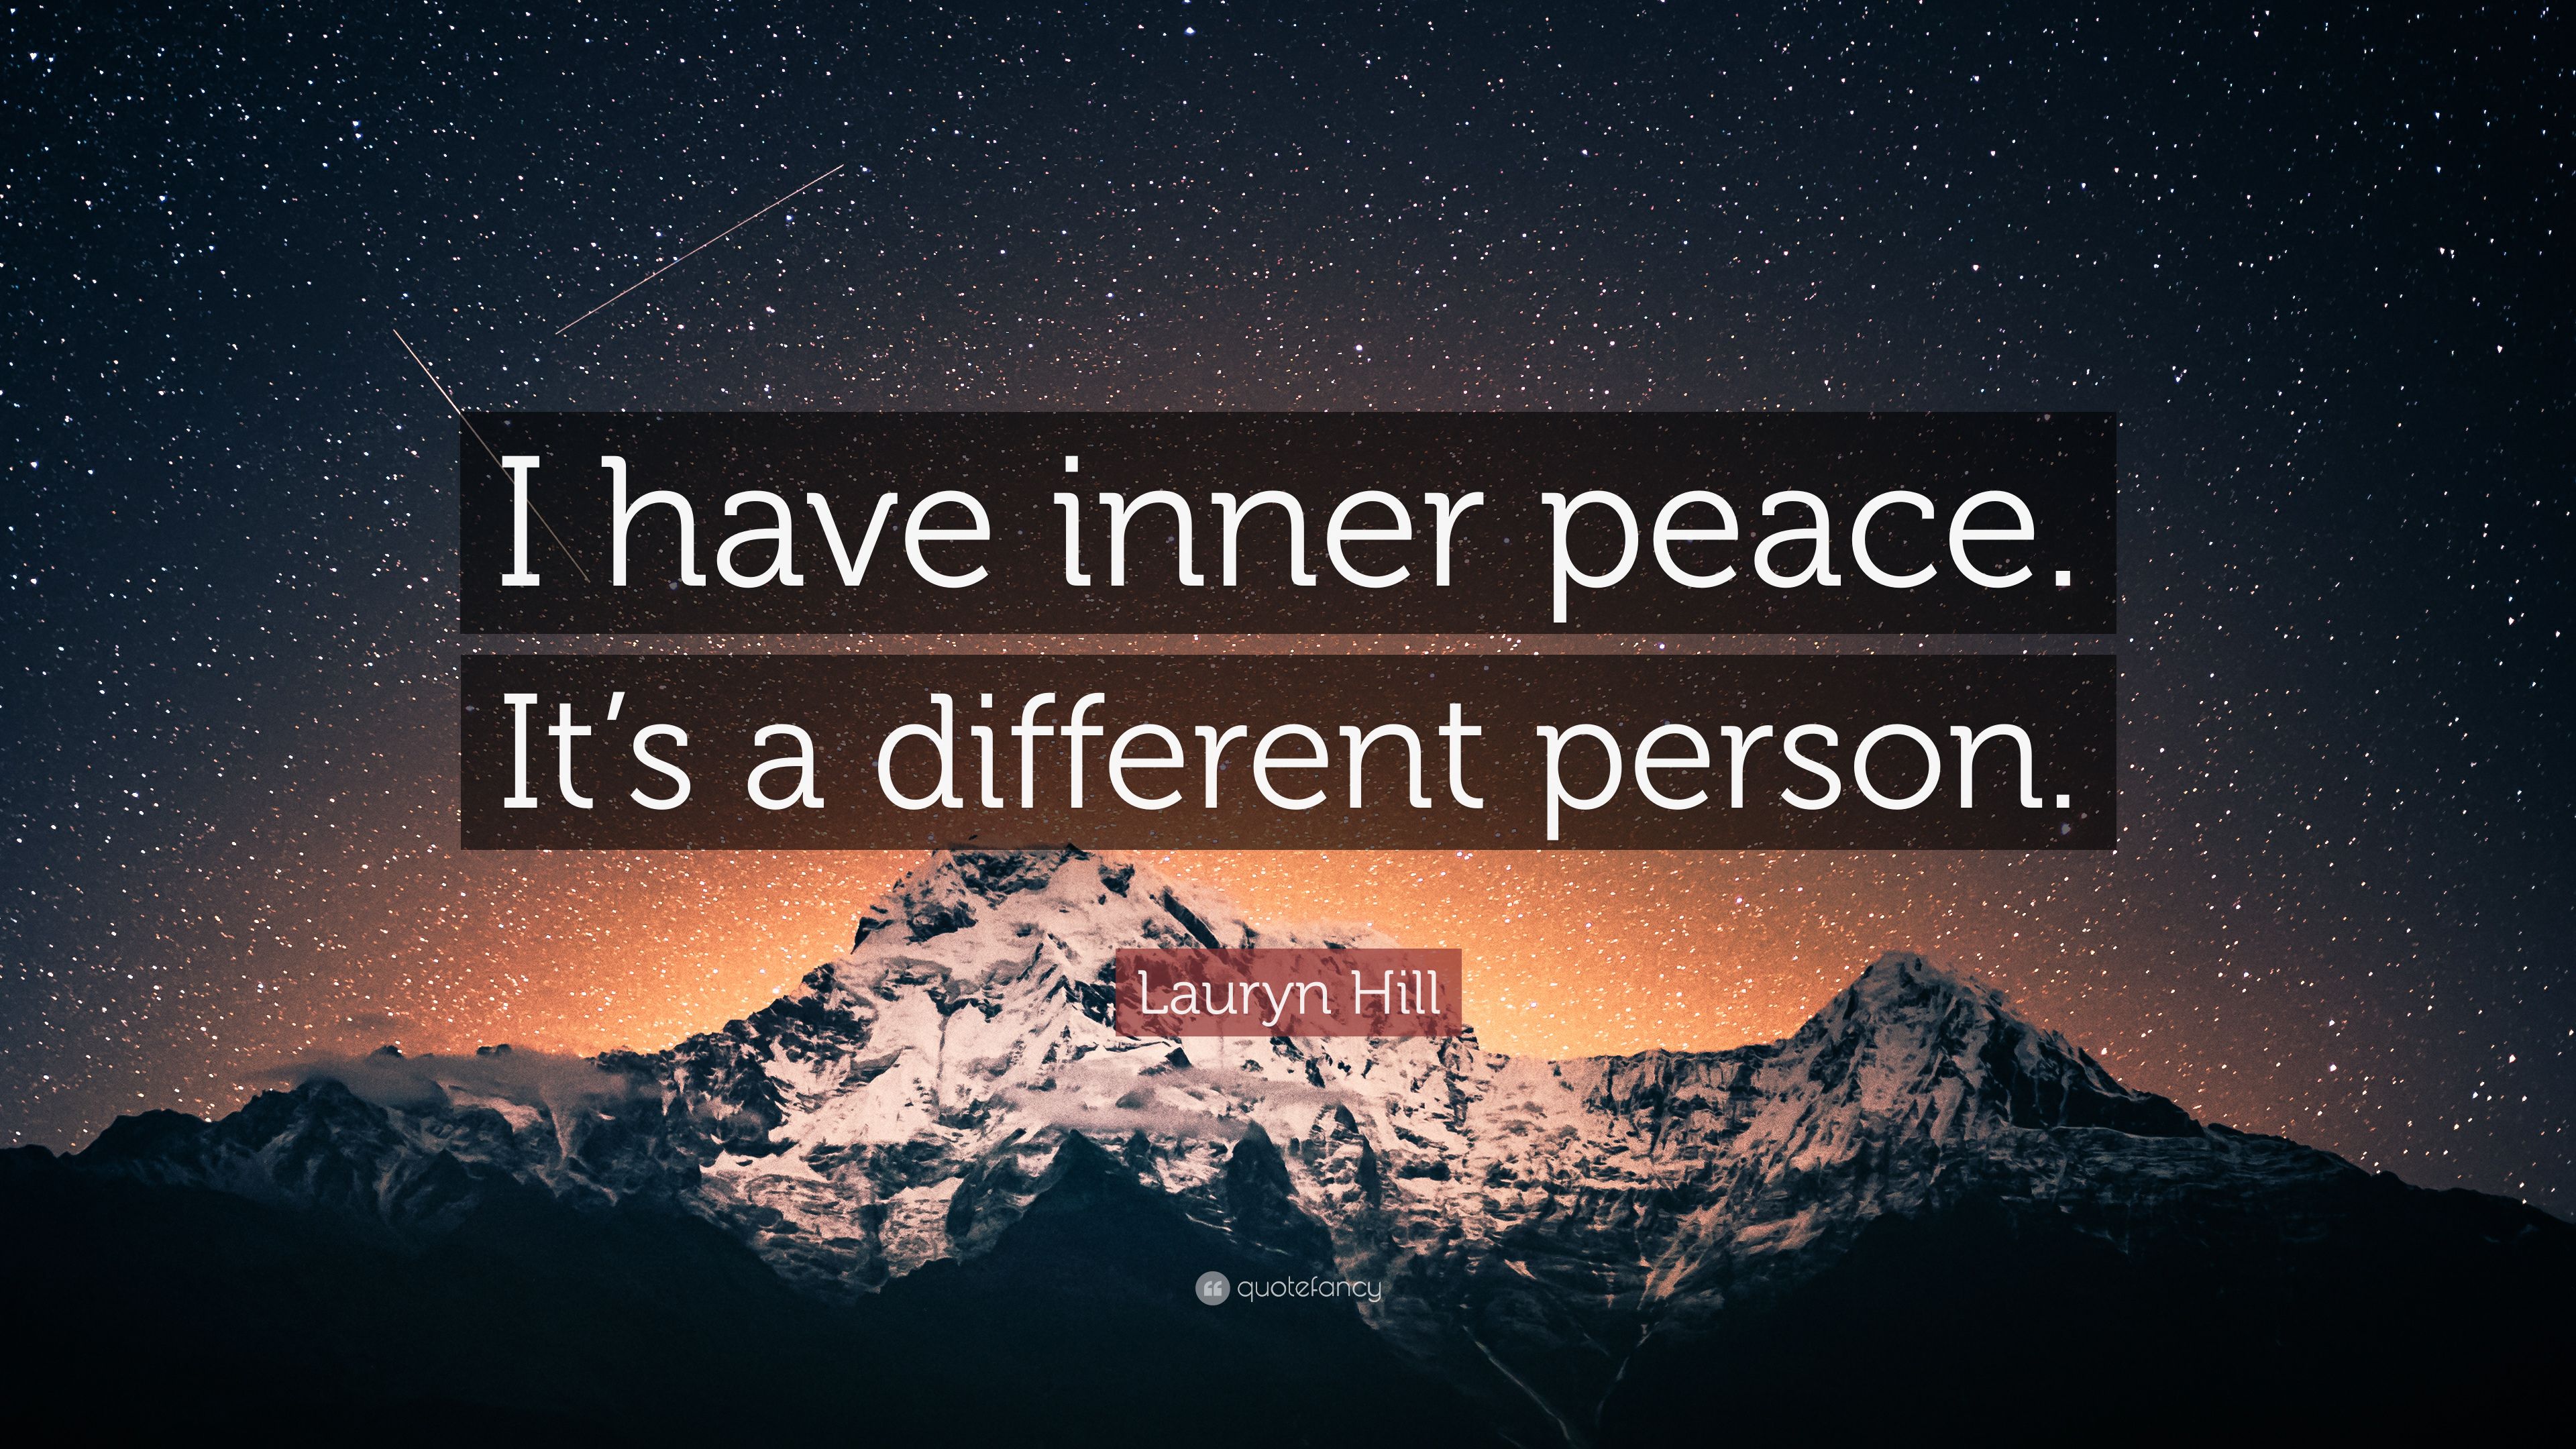 Lauryn Hill Quote: “I have inner peace. It's a different person